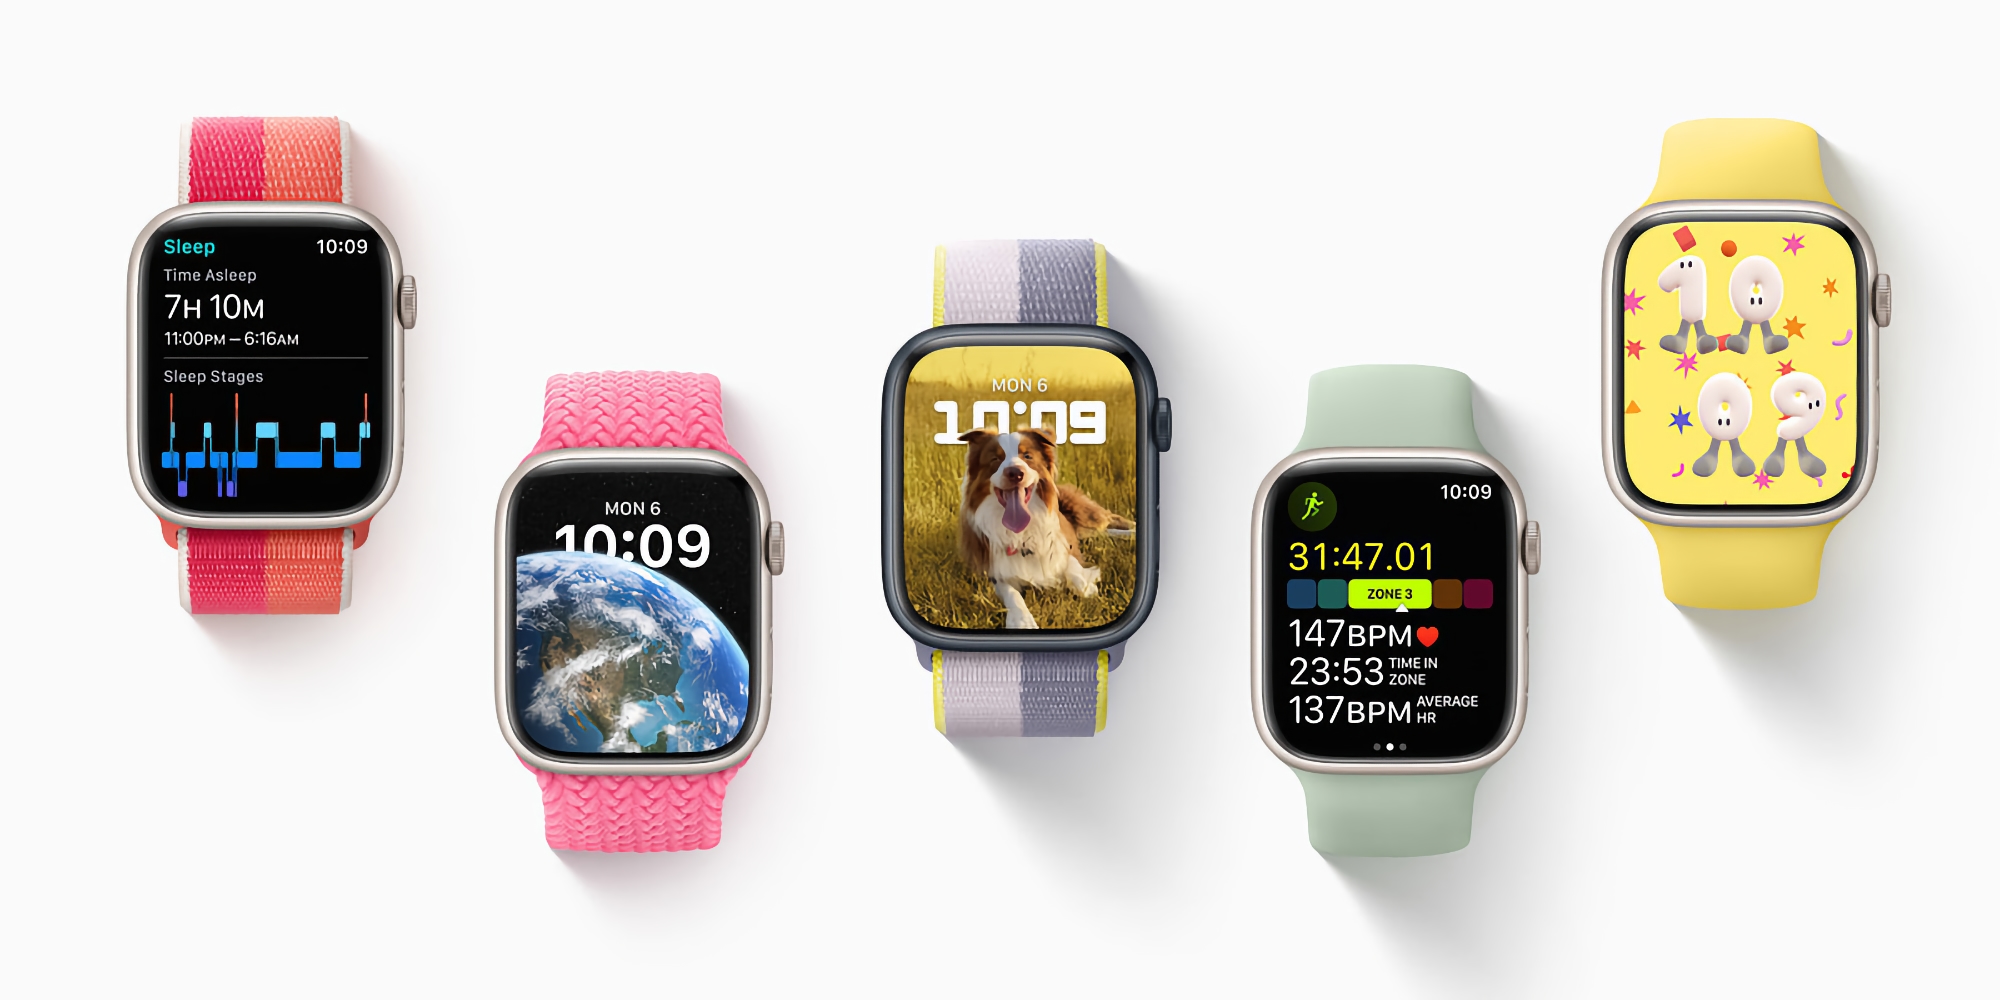 A stable version of watchOS 9 with improved health tracking features and new watch faces has been released